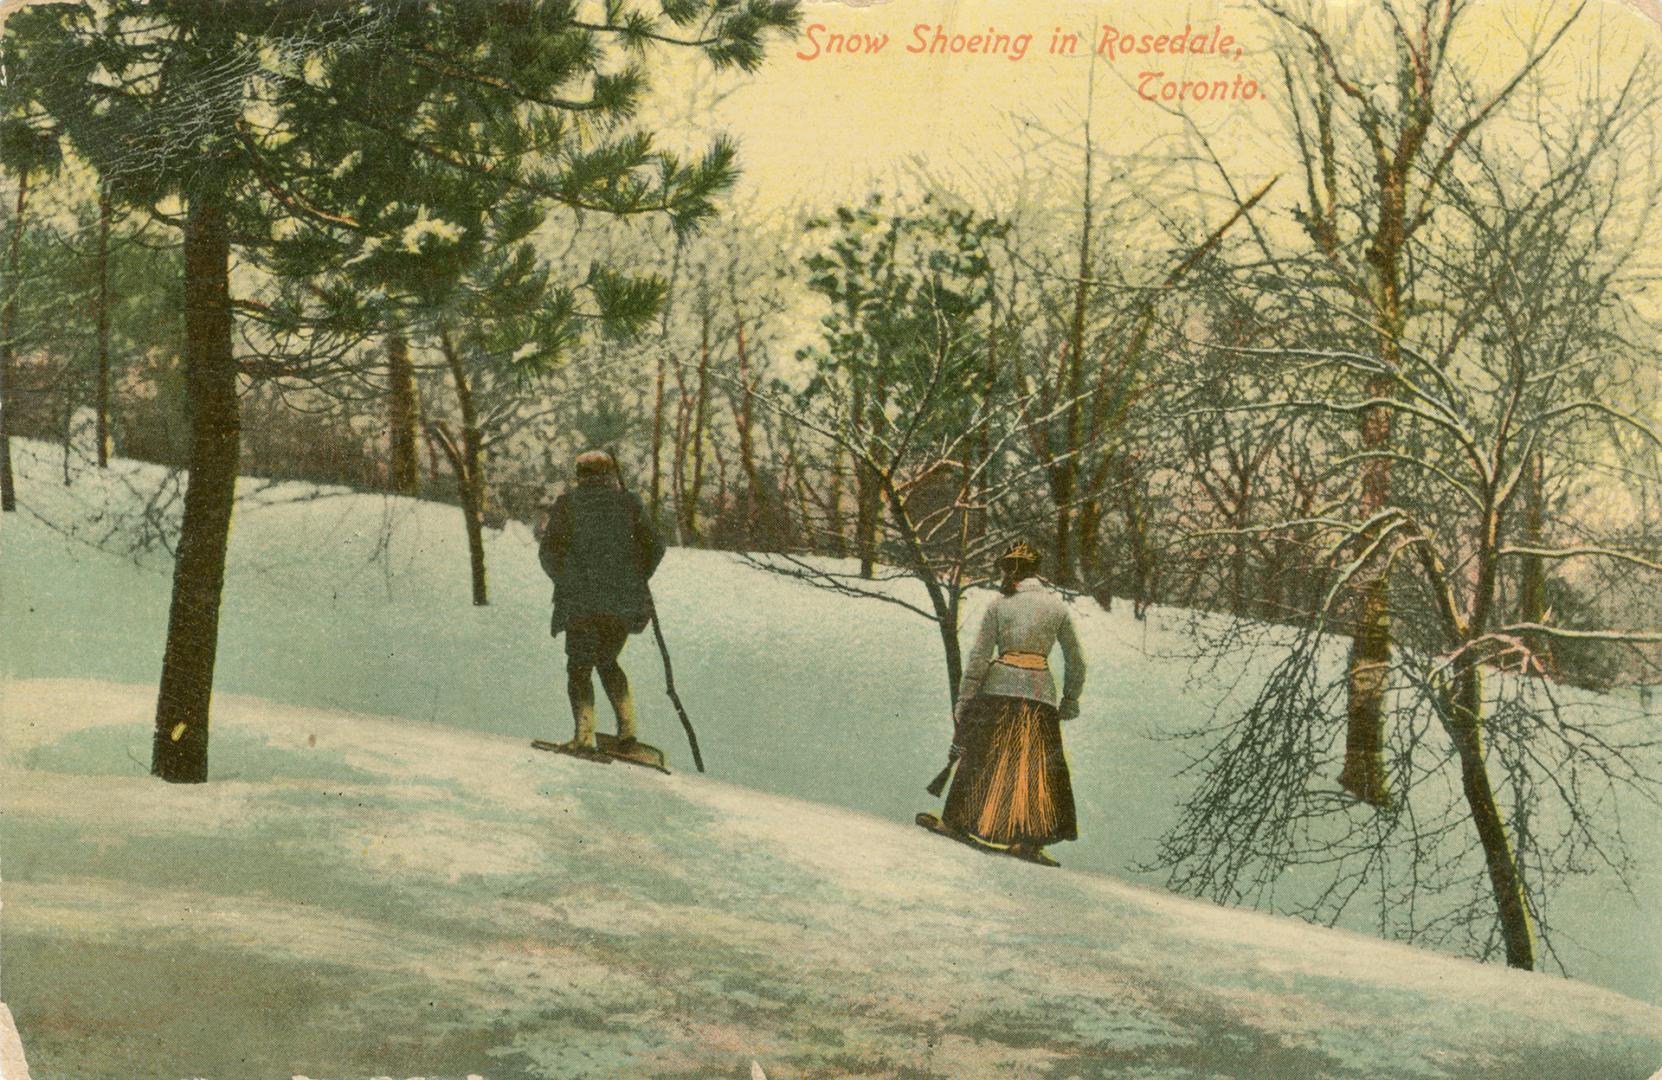 Two people snowshoeing in a park 